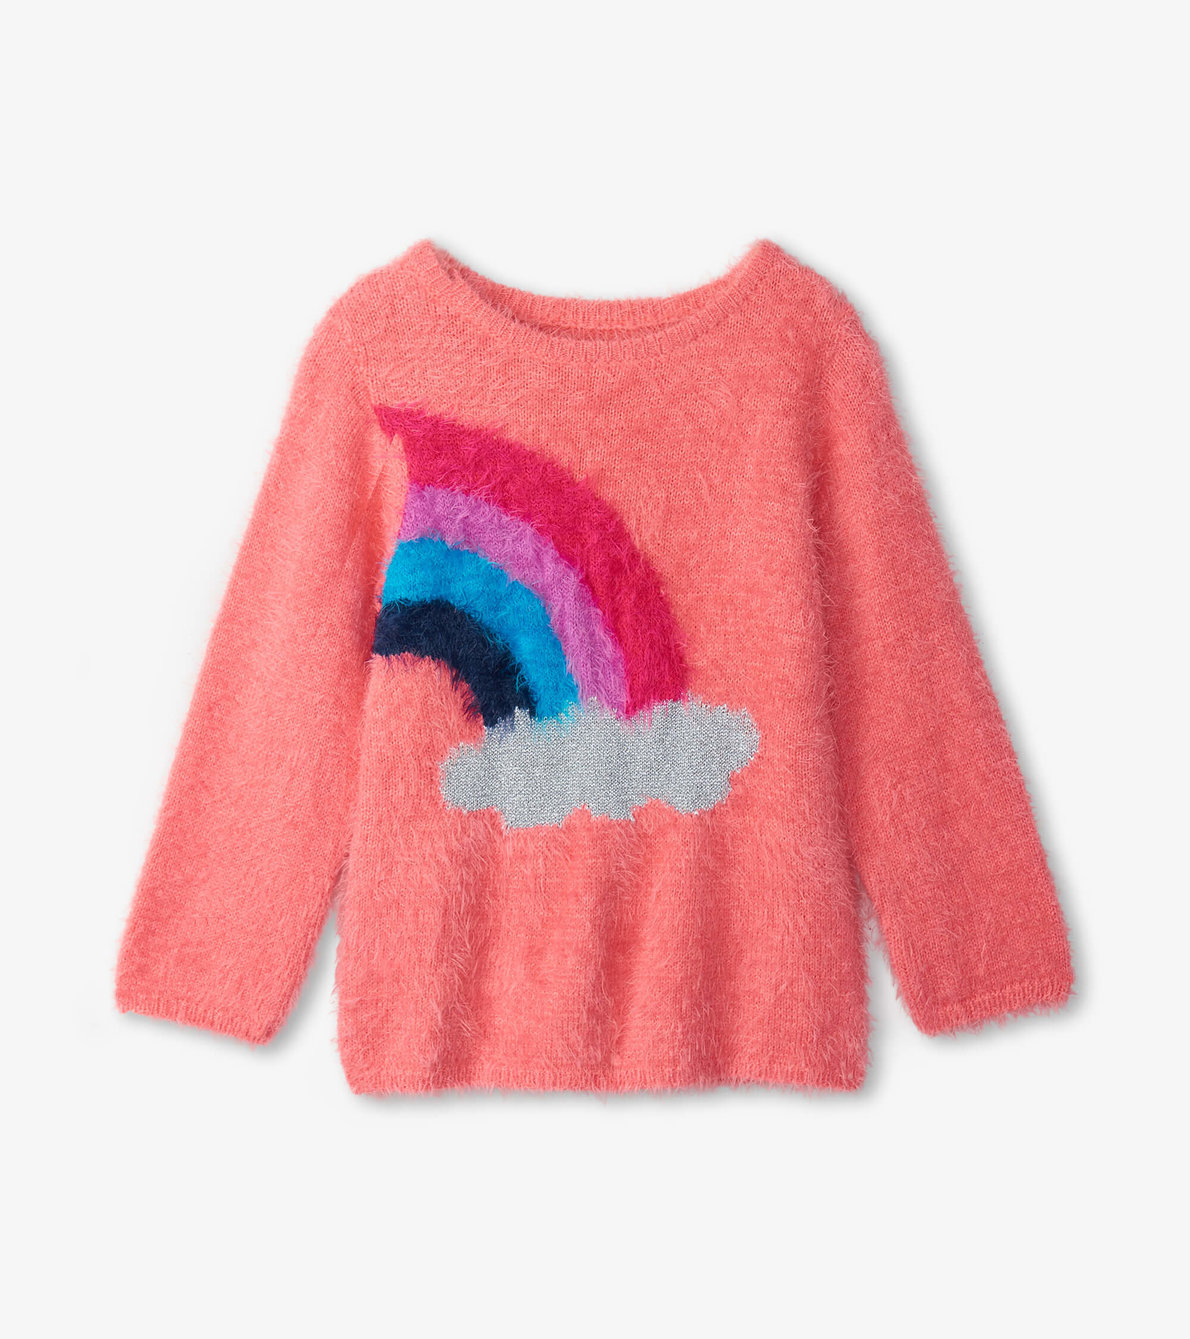 View larger image of Magical Rainbow Shimmer Fuzzy Sweater